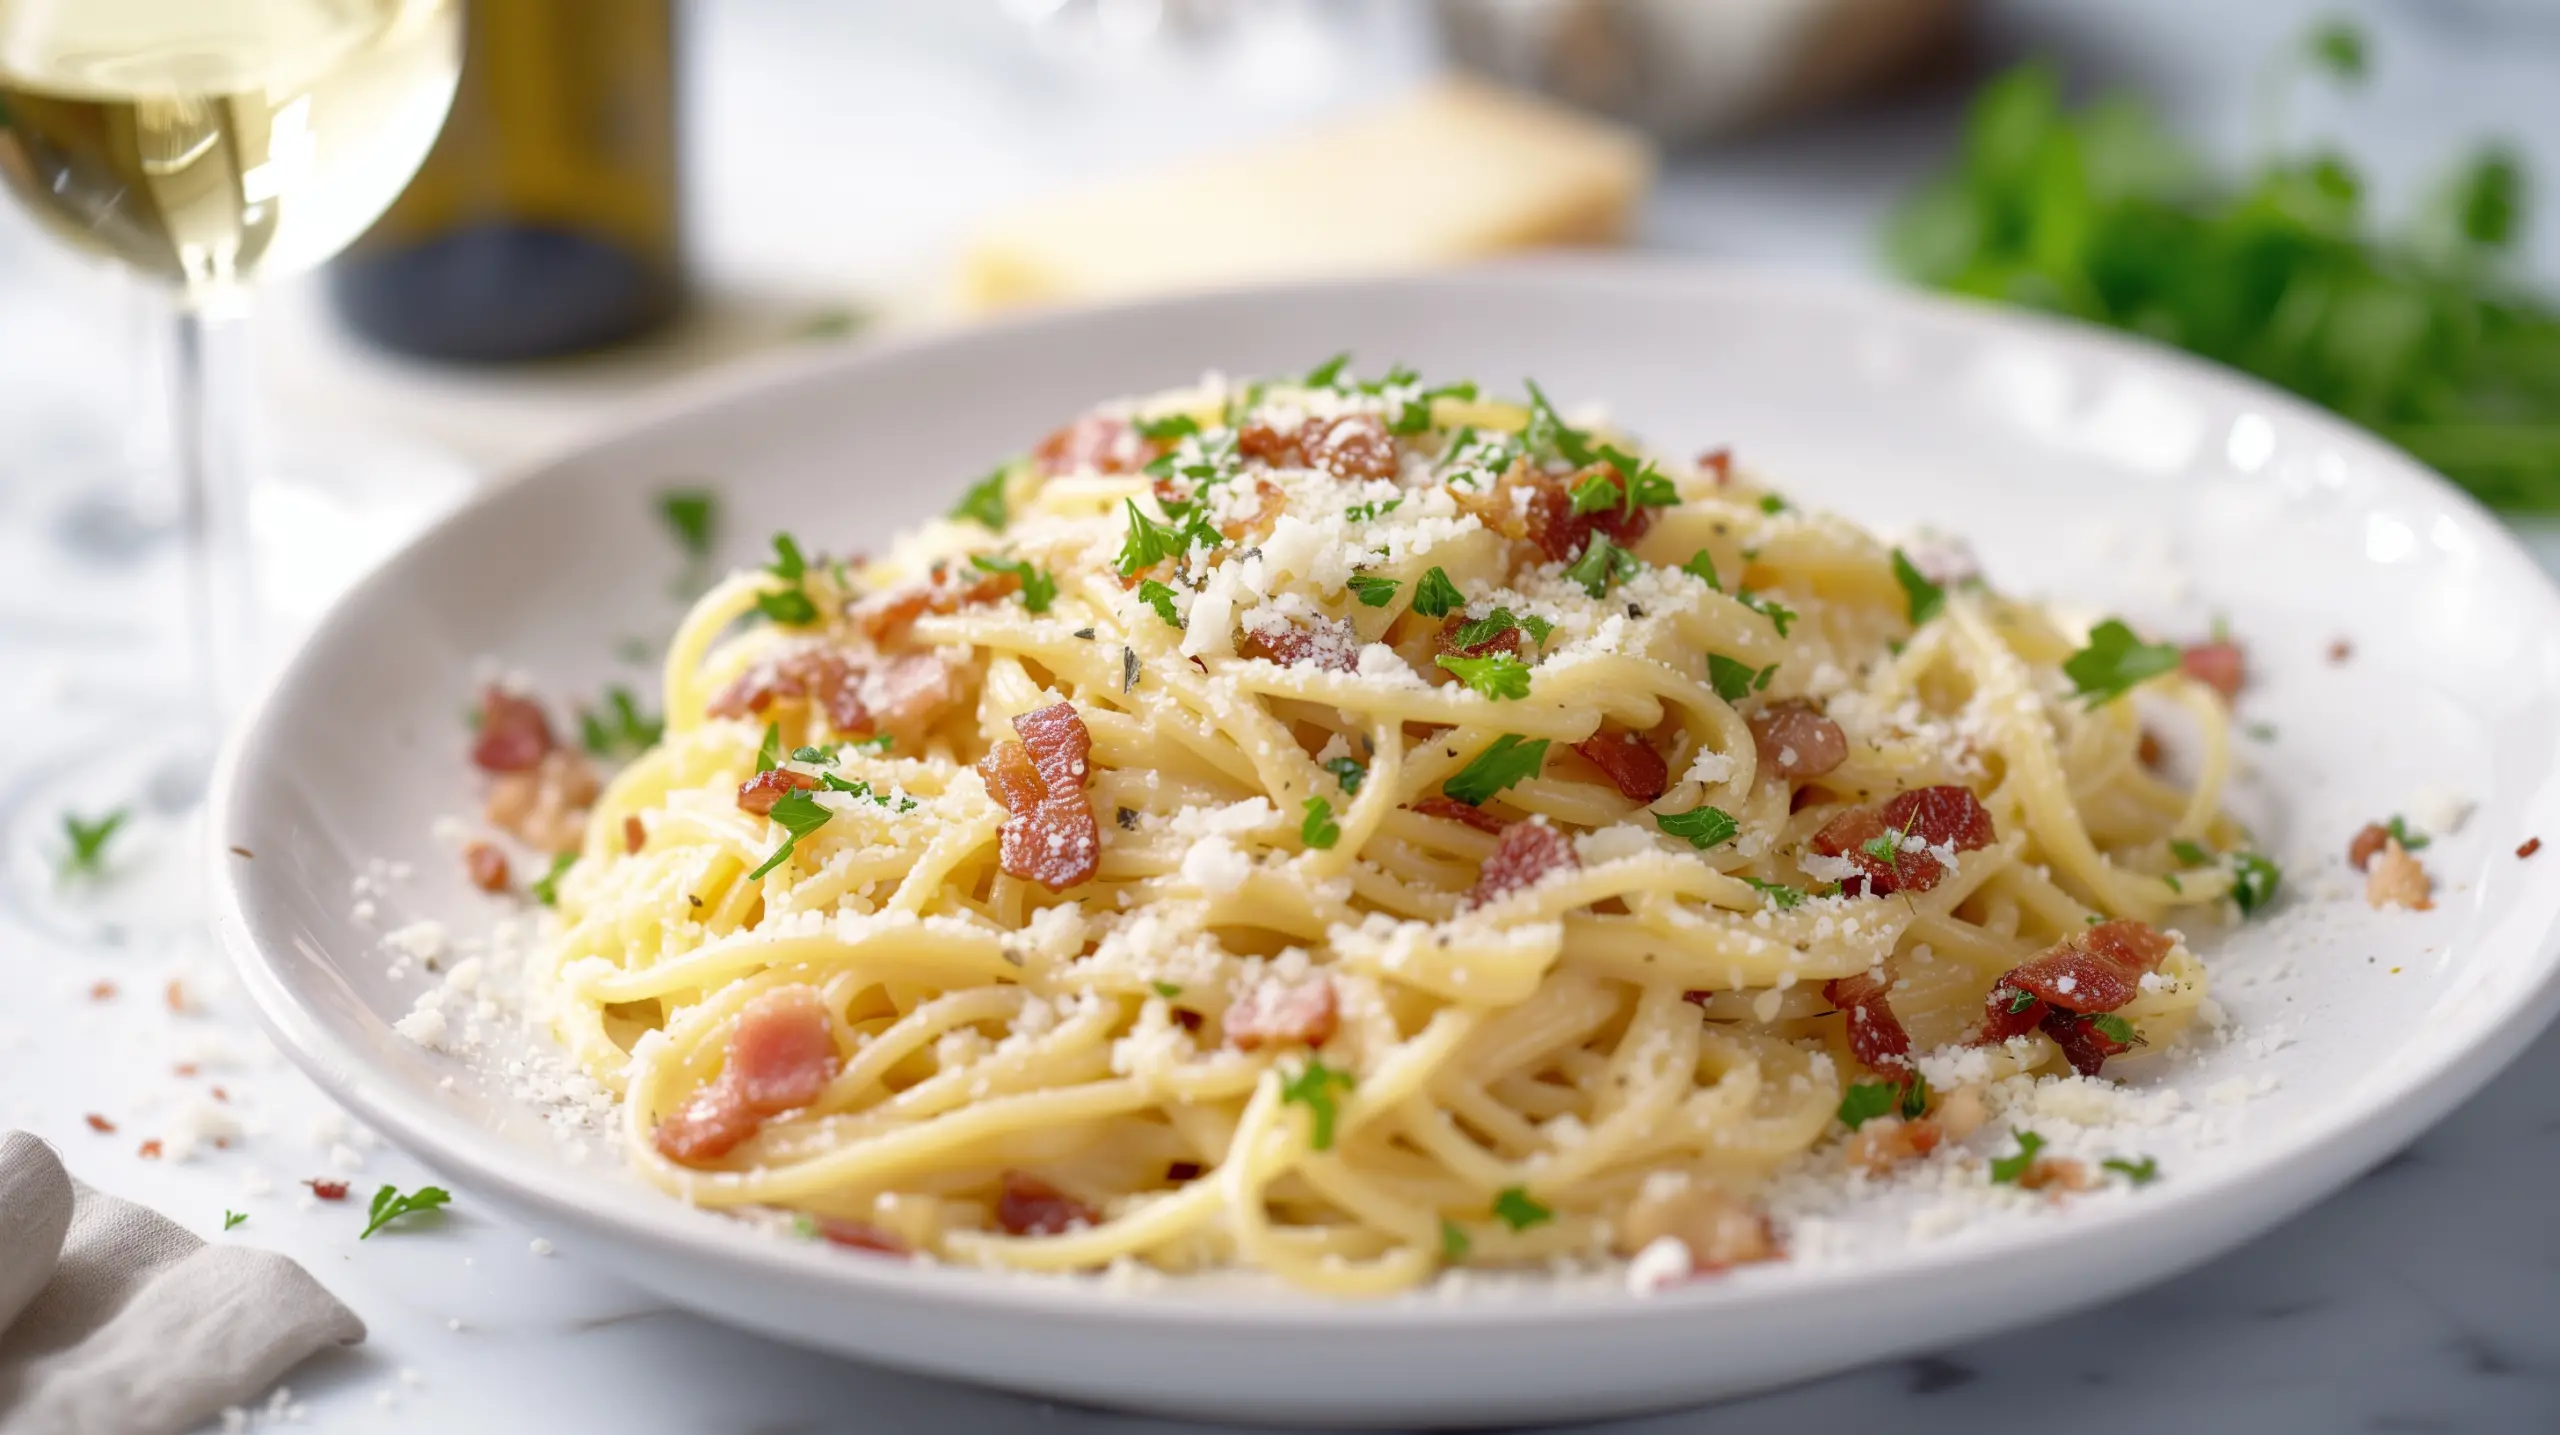 Creamy and flavorful Spaghetti Carbonara served with a sprinkle of freshly ground black pepper.